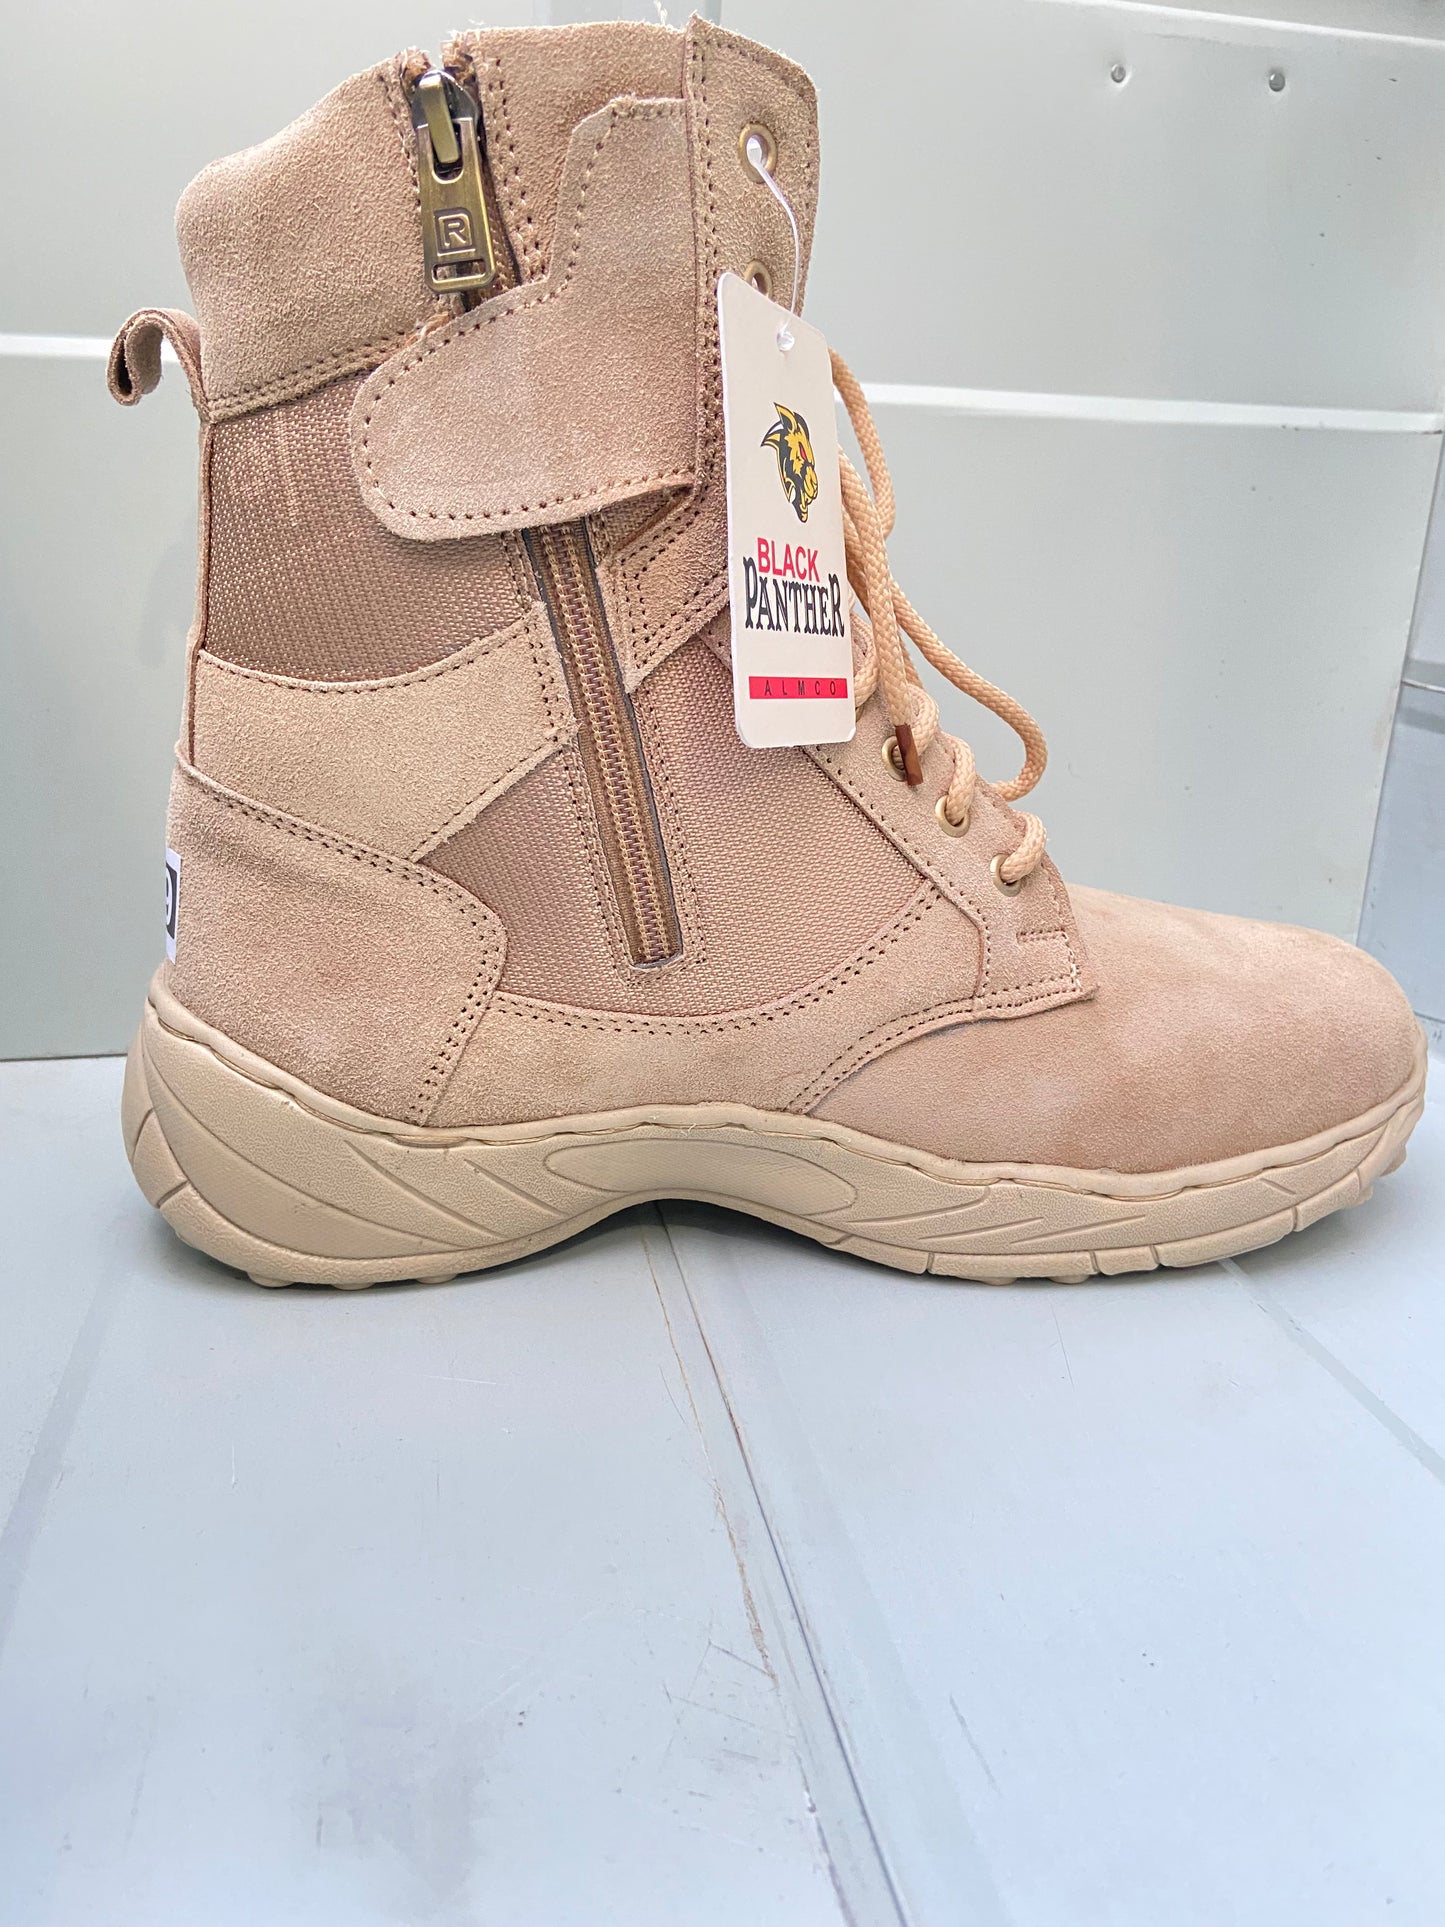 Black panther Delta Boot (US Army Boot)